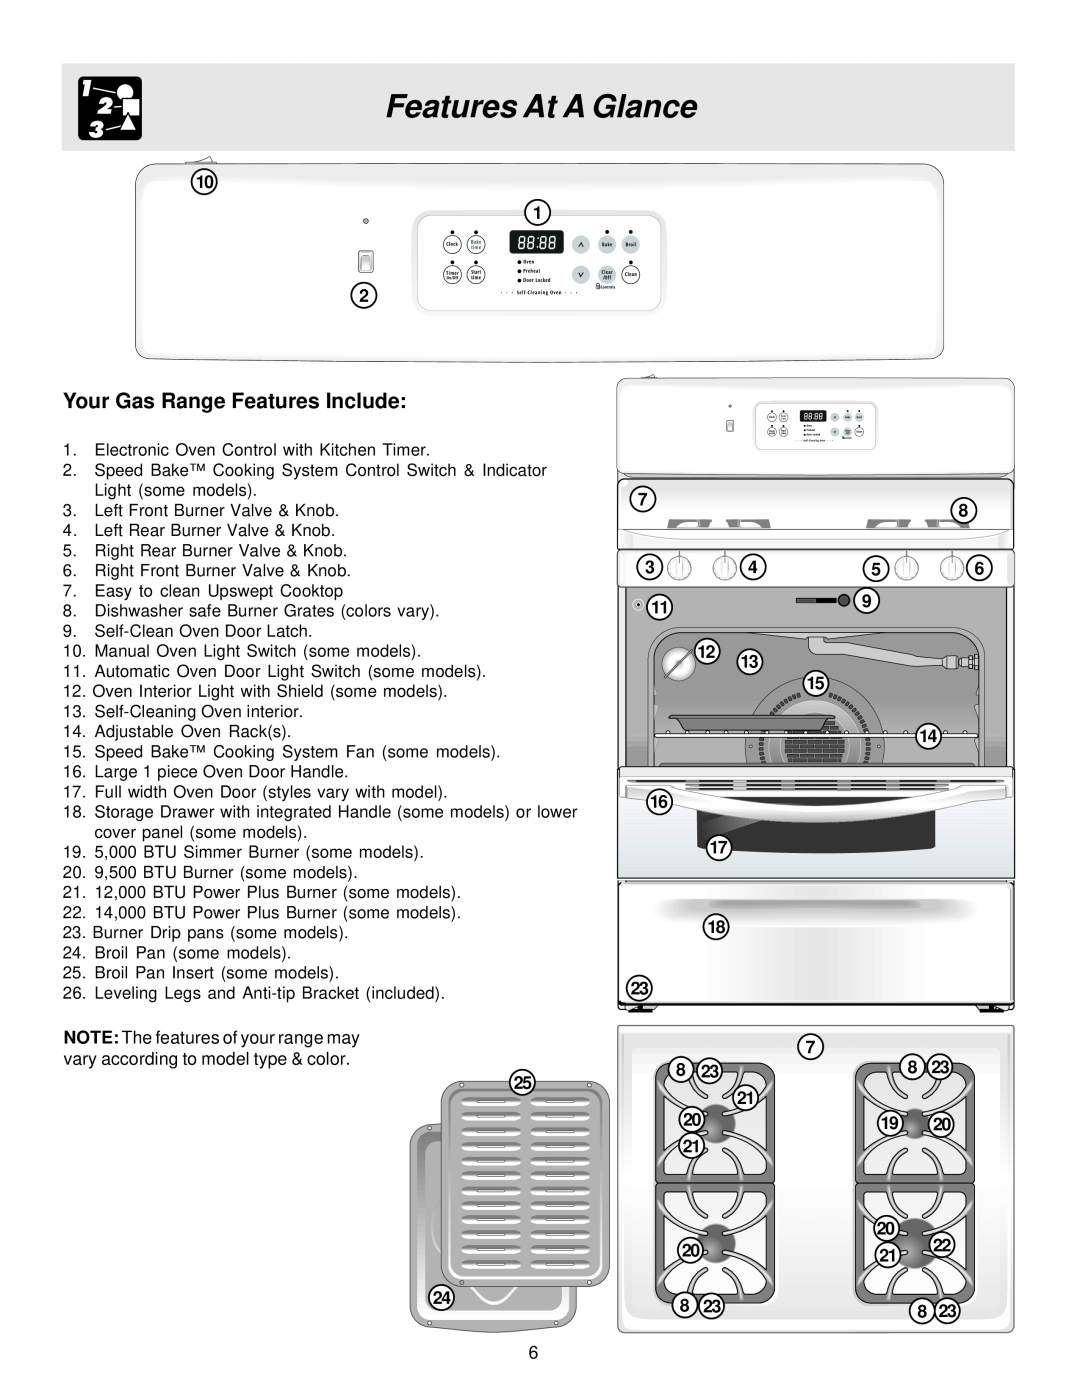 Frigidaire ES300 manual Features At A Glance, Your Gas Range Features Include 